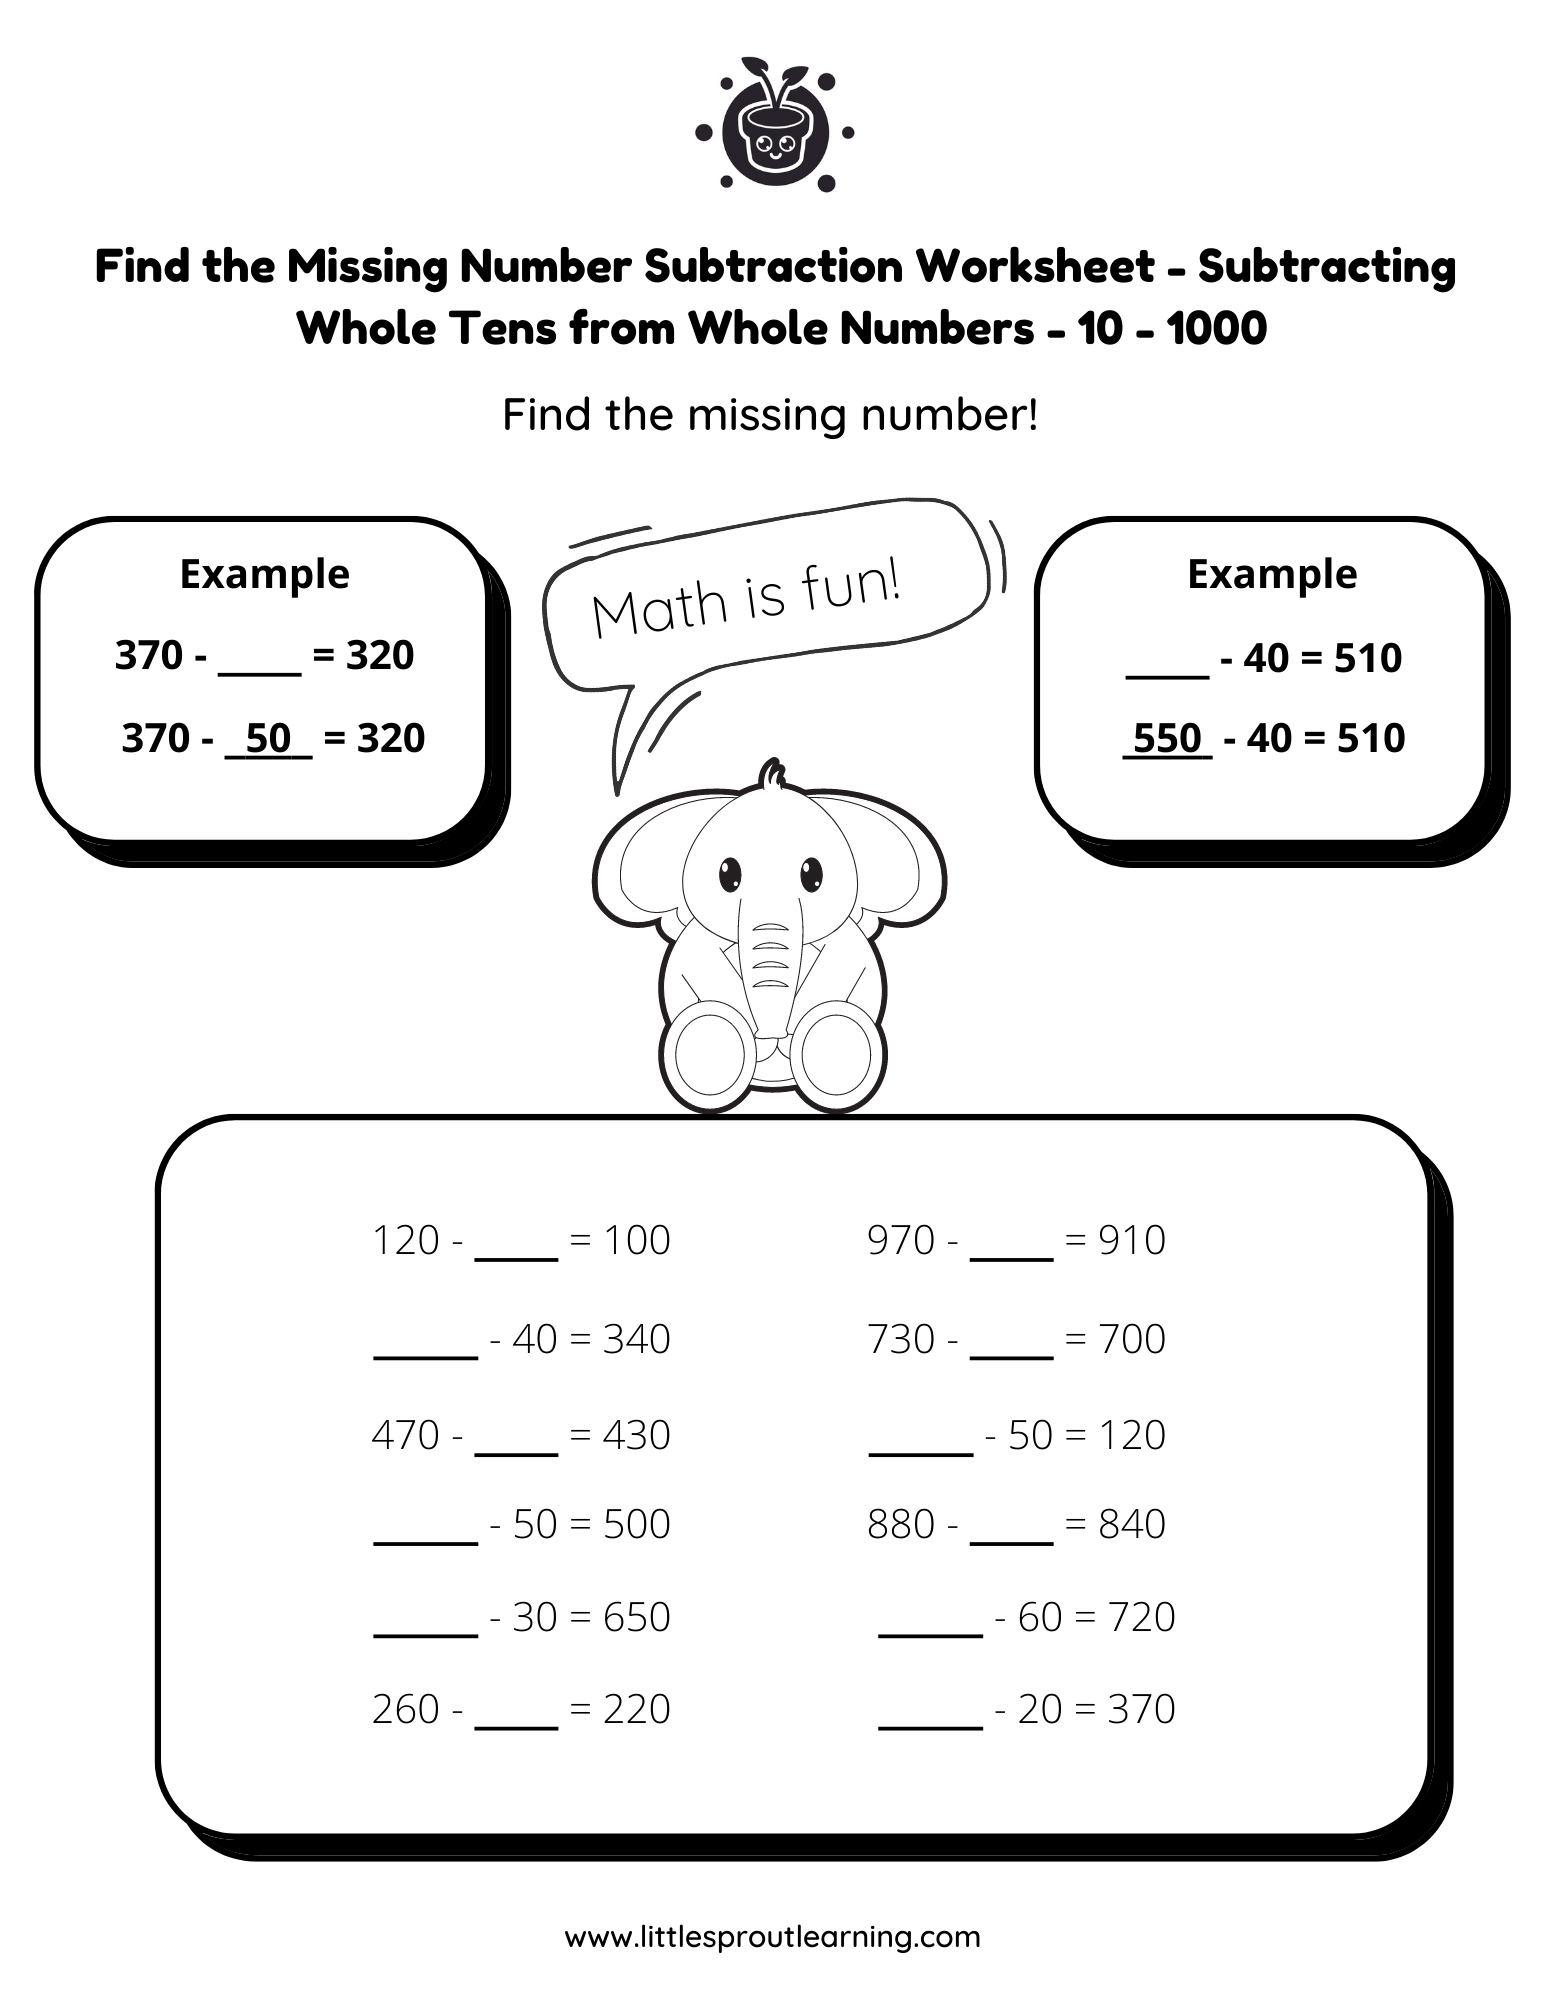 Find the Missing Number Subtraction Worksheet – Whole Numbers Missing Minuend or Subtrahend